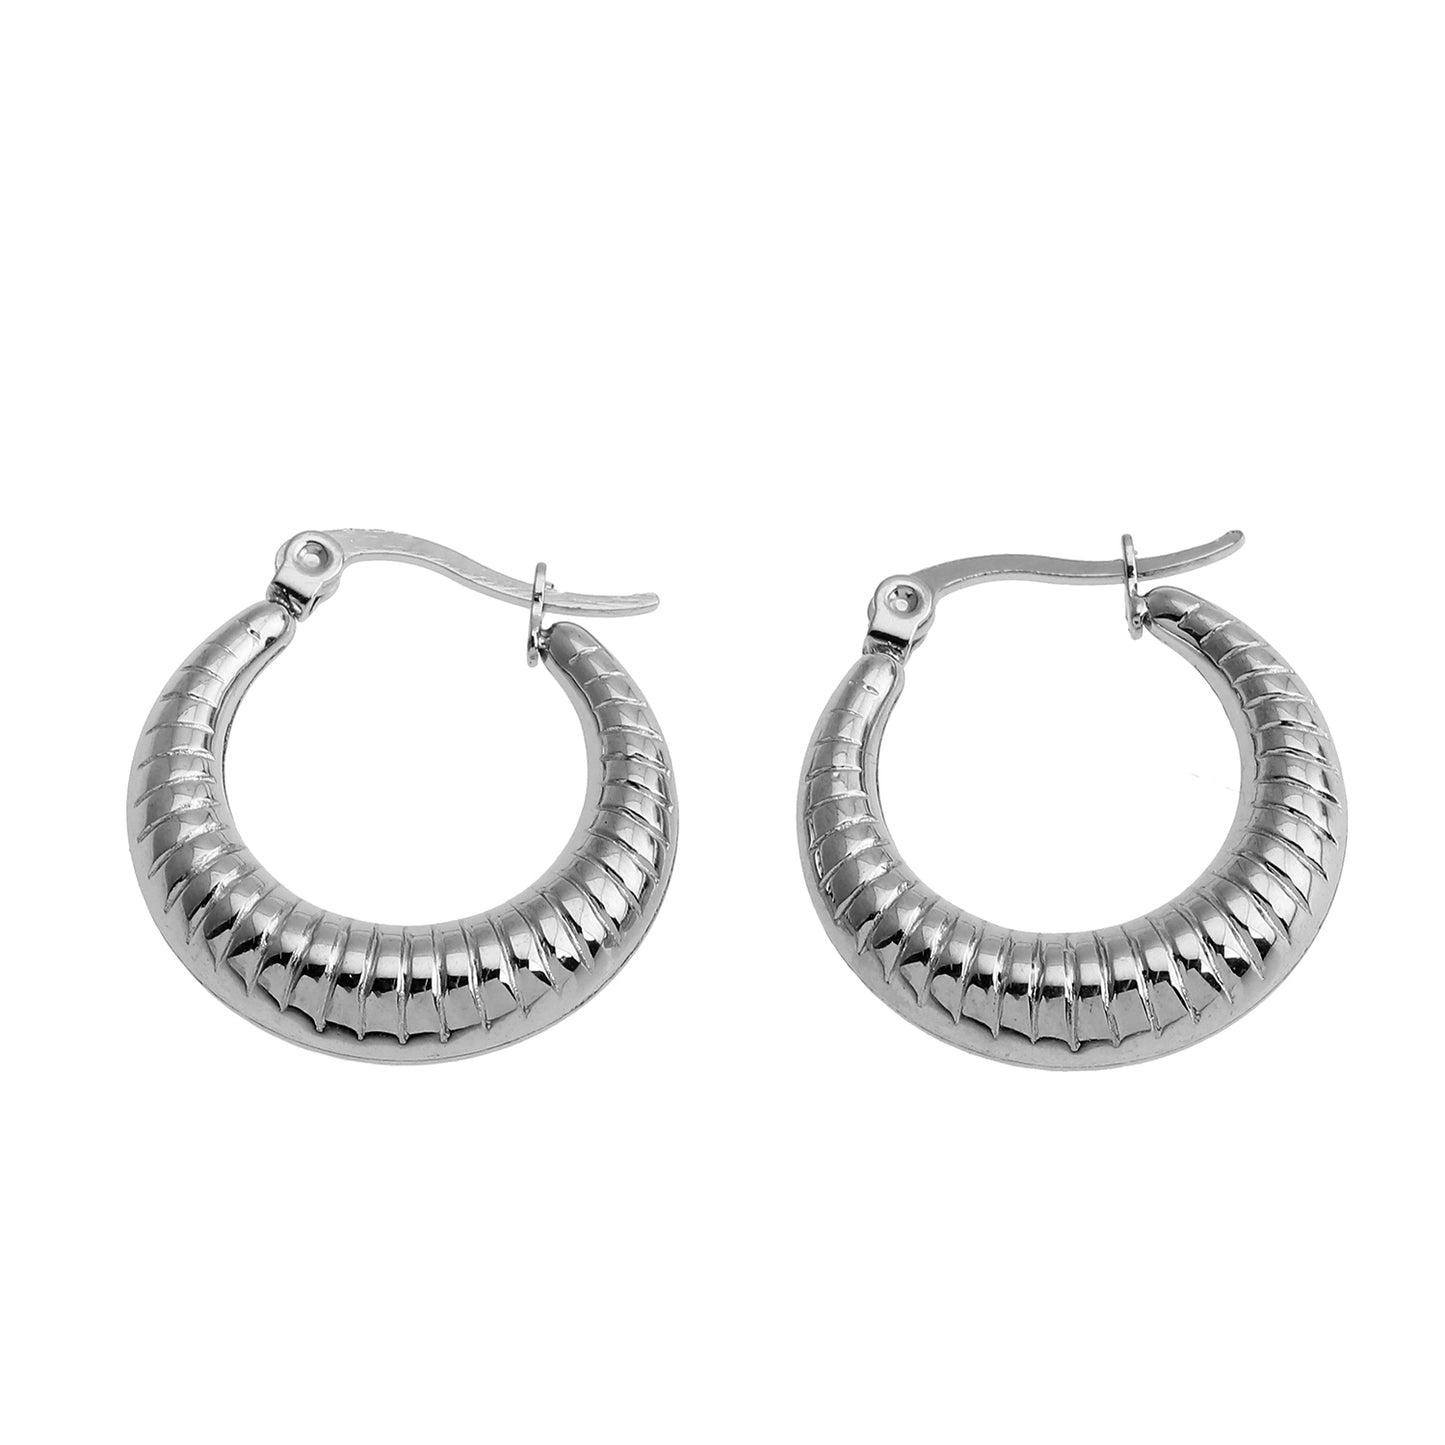 chunky-hoops | hackney-nine | hackneynine | necklace | hoops | bracelets | earrings | charms | studs_earrings | jewellery | jewellery-store | shop-jewelry | gold-jewellery | silver-jewellery | dressy_jewellery | classy_ jewellery | on_trend_jewellery | fashion_ jewellery | cool_jewellery | affordable_jewellery | designer_jewellery | vintage_jeweler | gifts-for-her | gifts-for-mum | gifts-for-girls | gifts-for-females | dainty-jewellery | bridesmaid-gift 